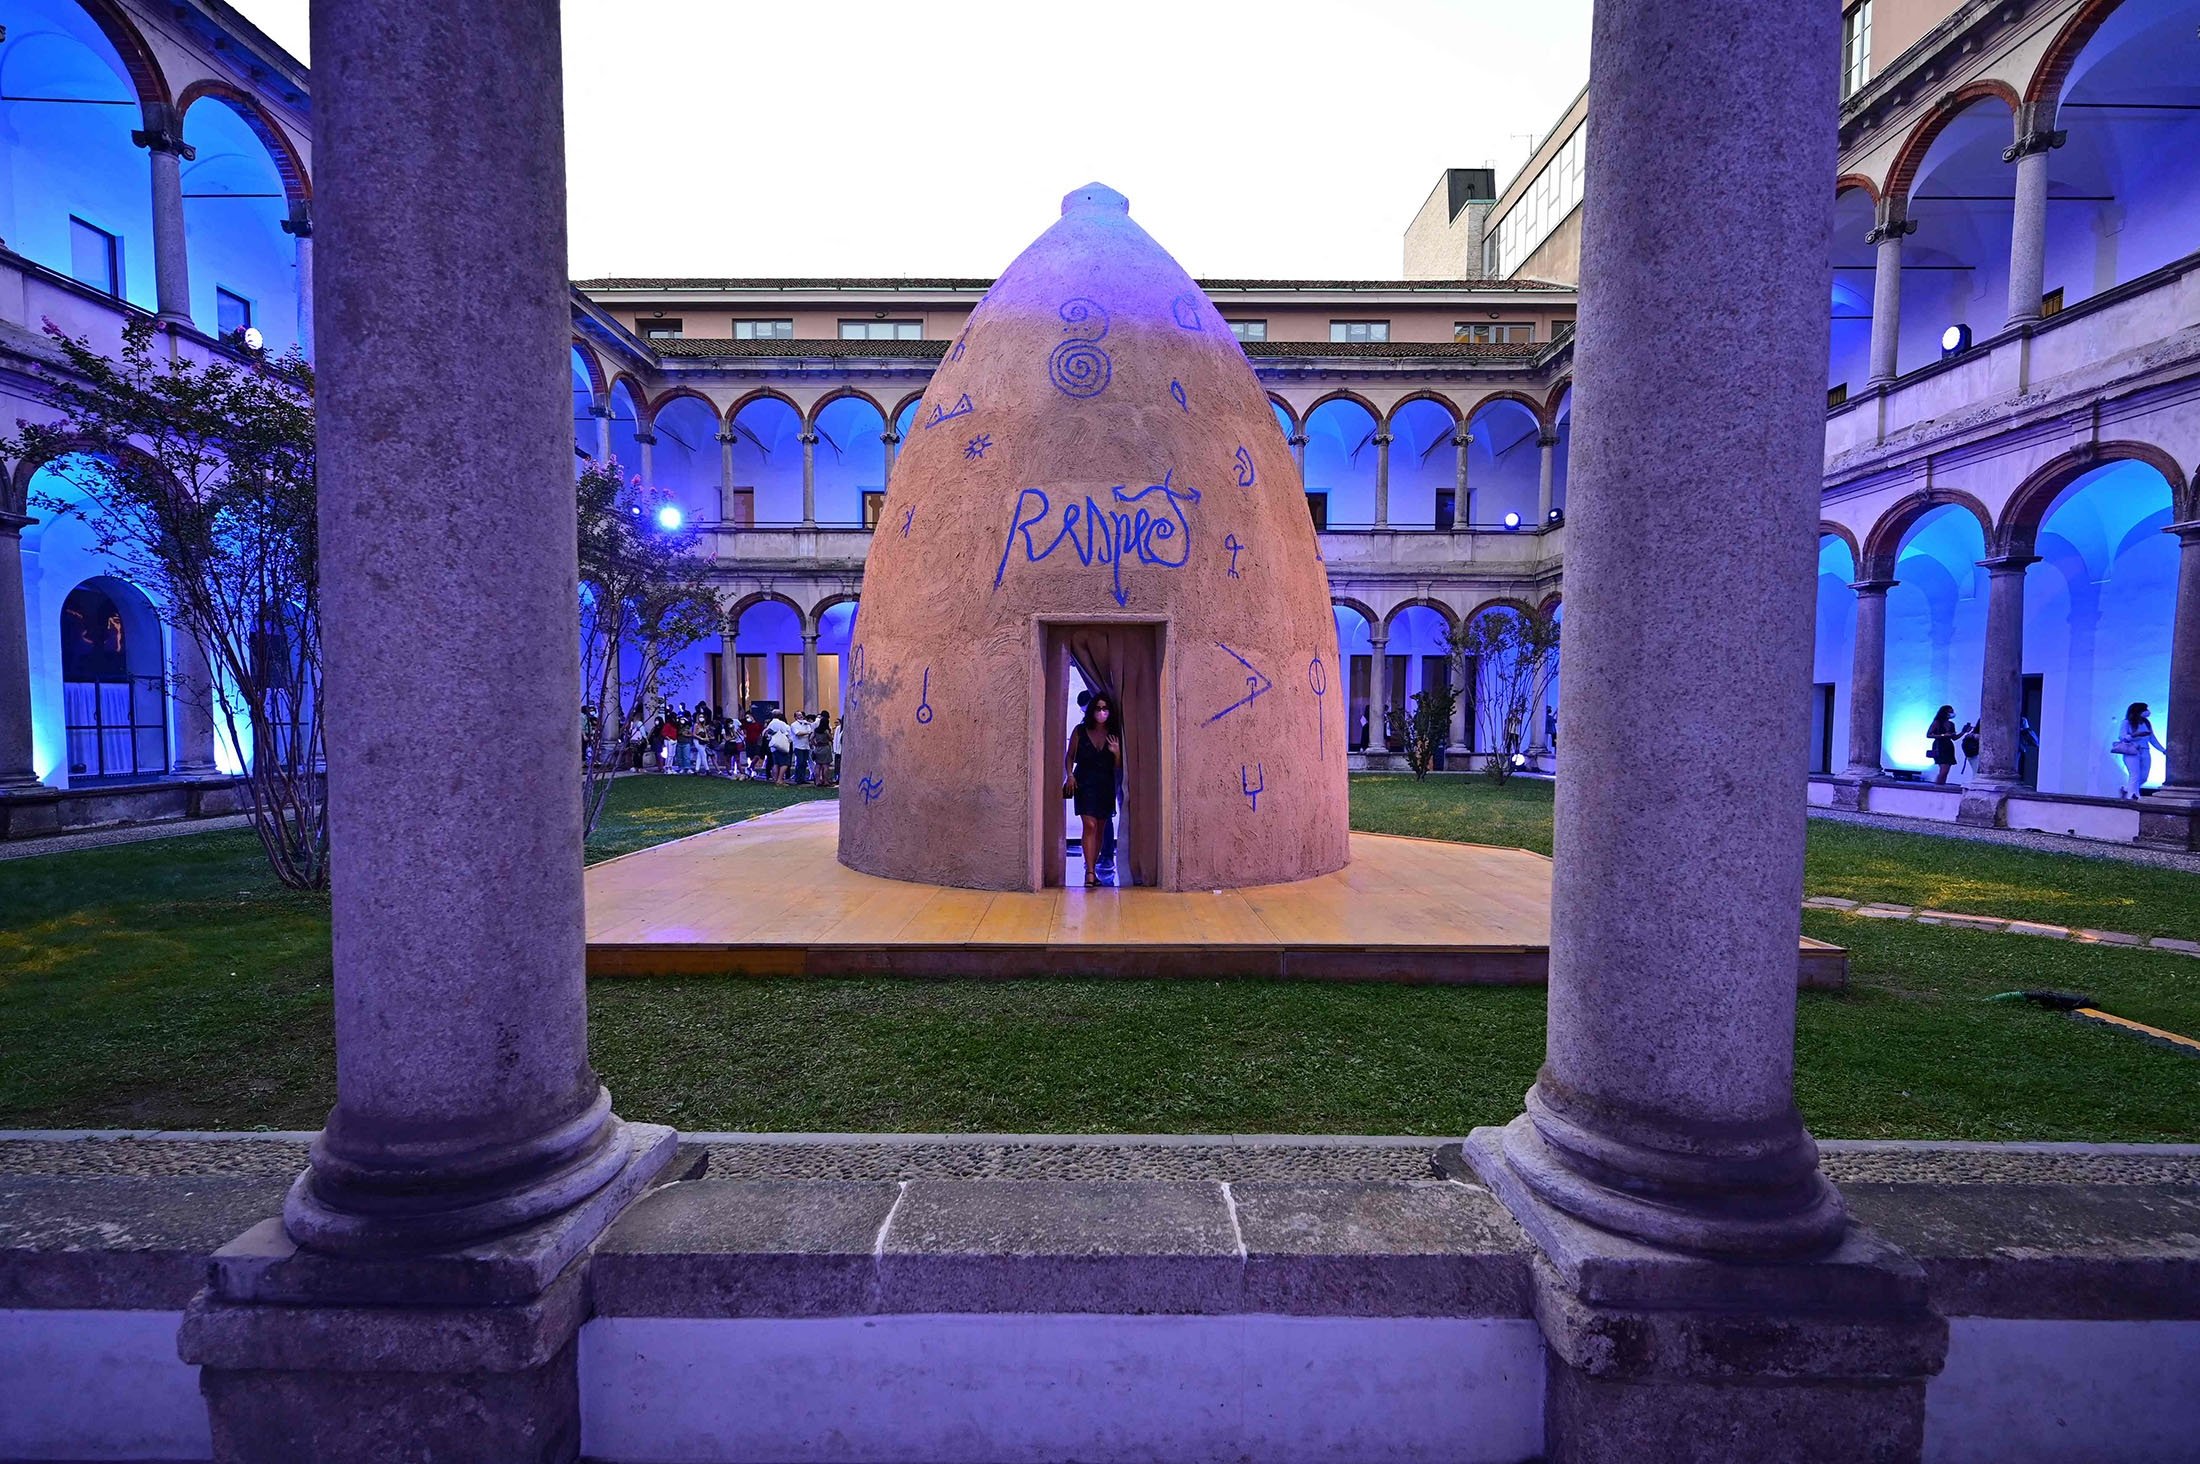 A work called 'Falso Autentico' by Italian artist Marco Nereo Rotelli at the University of Milan during the Fuorisalone 2021 design week, in Milan, Italy, Sept. 6, 2021. (AFP Photo)